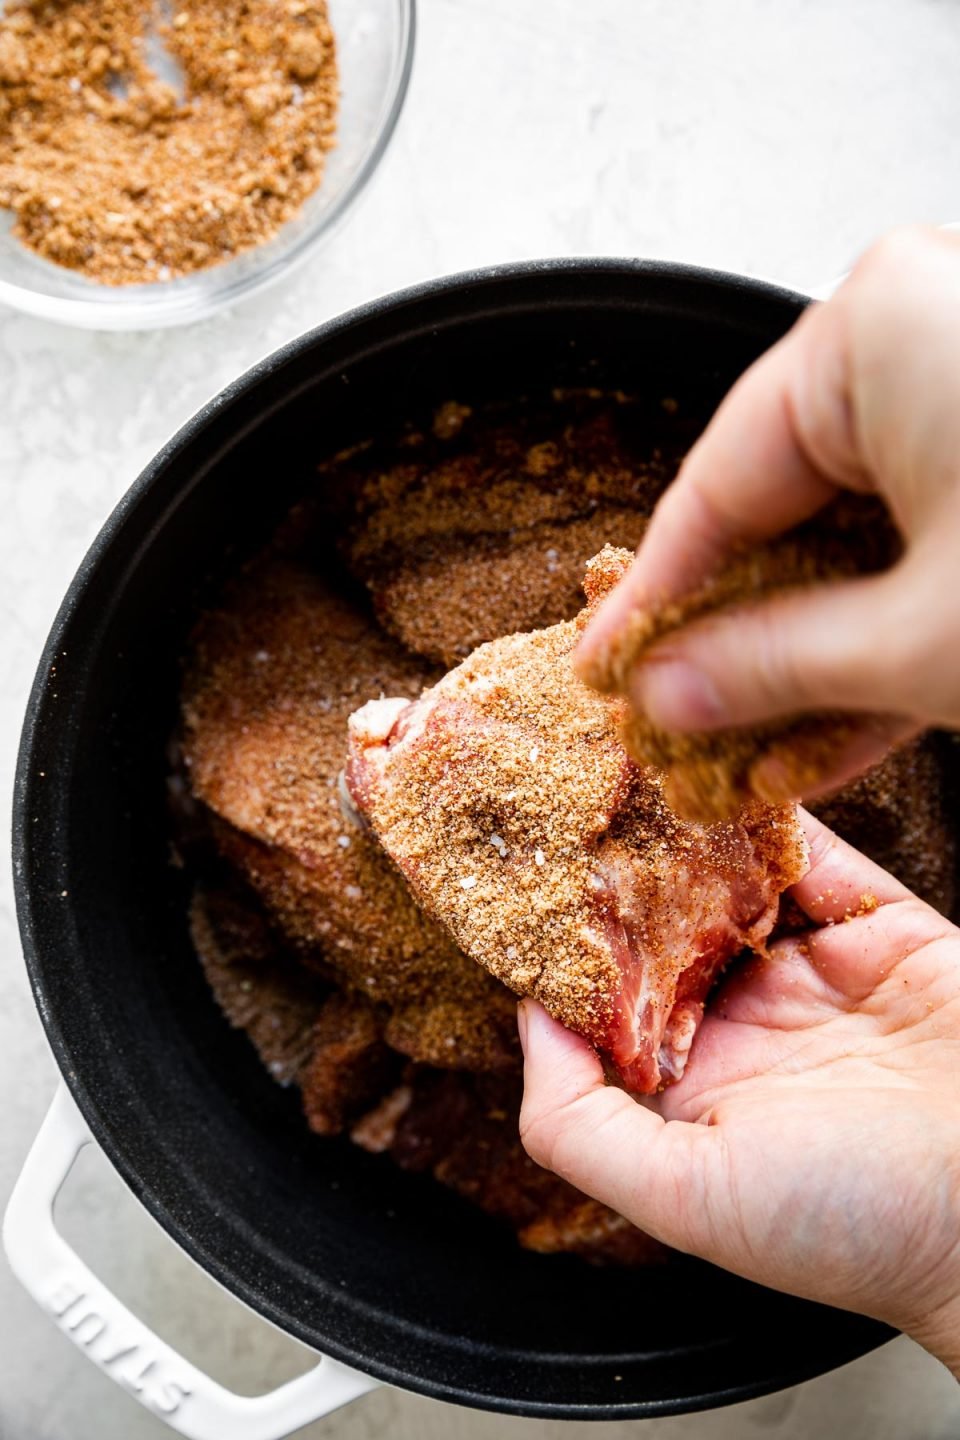 A woman's hands shown sprinkling bbq dry rub on pork shoulder over a white Staub dutch oven. The dutch oven sits atop a creamy cement surface, next to a bowl of BBQ dry rub.